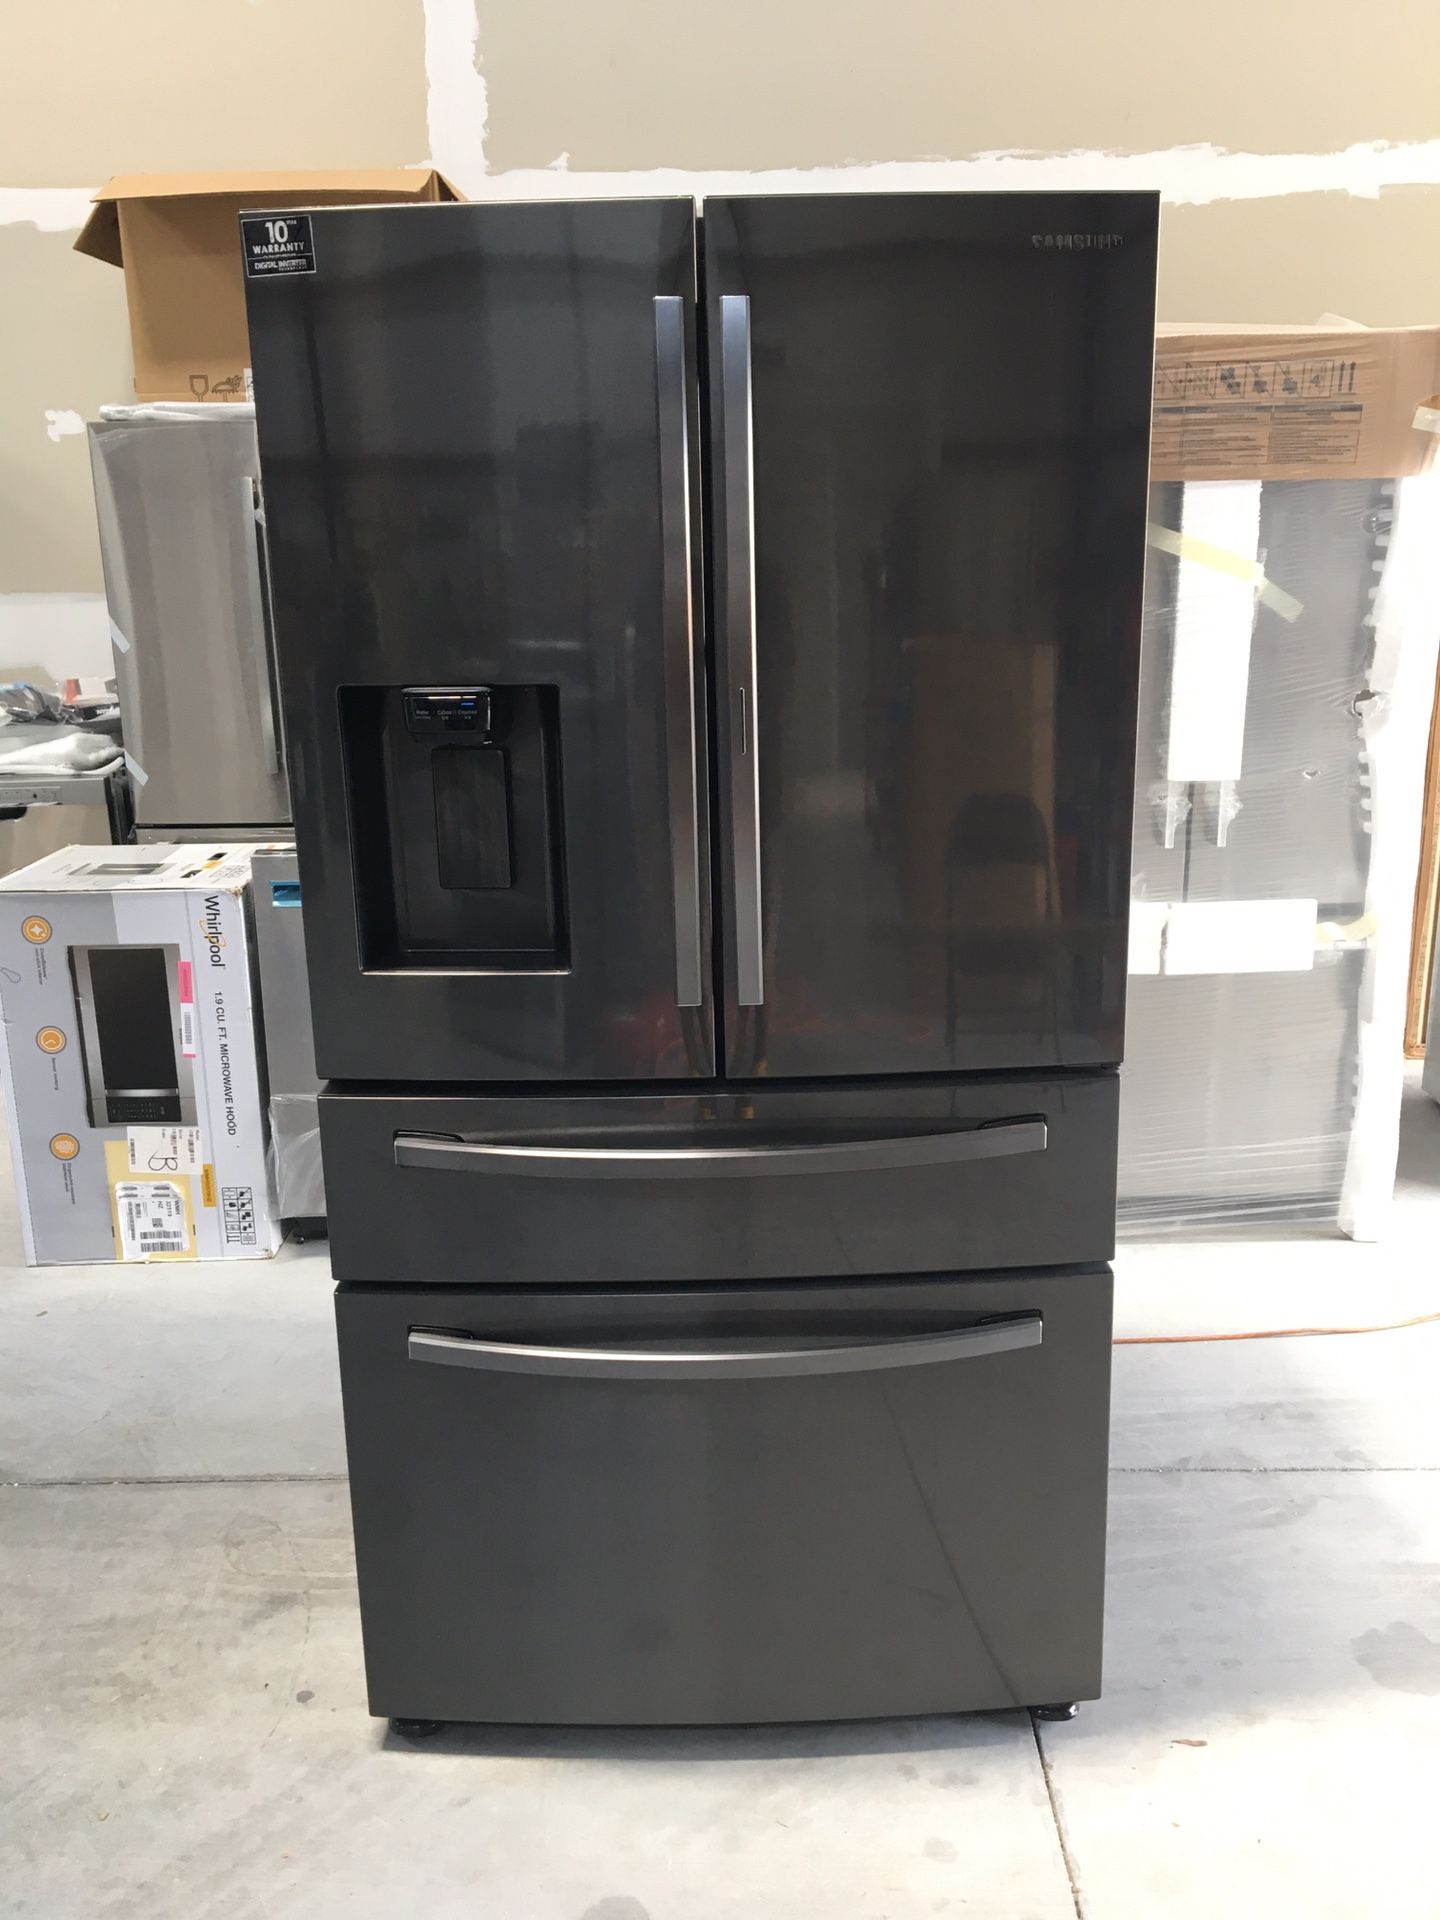 Brand new open box Samsung Black Stainless for door refrigerator with showcase door and inside water pitcher